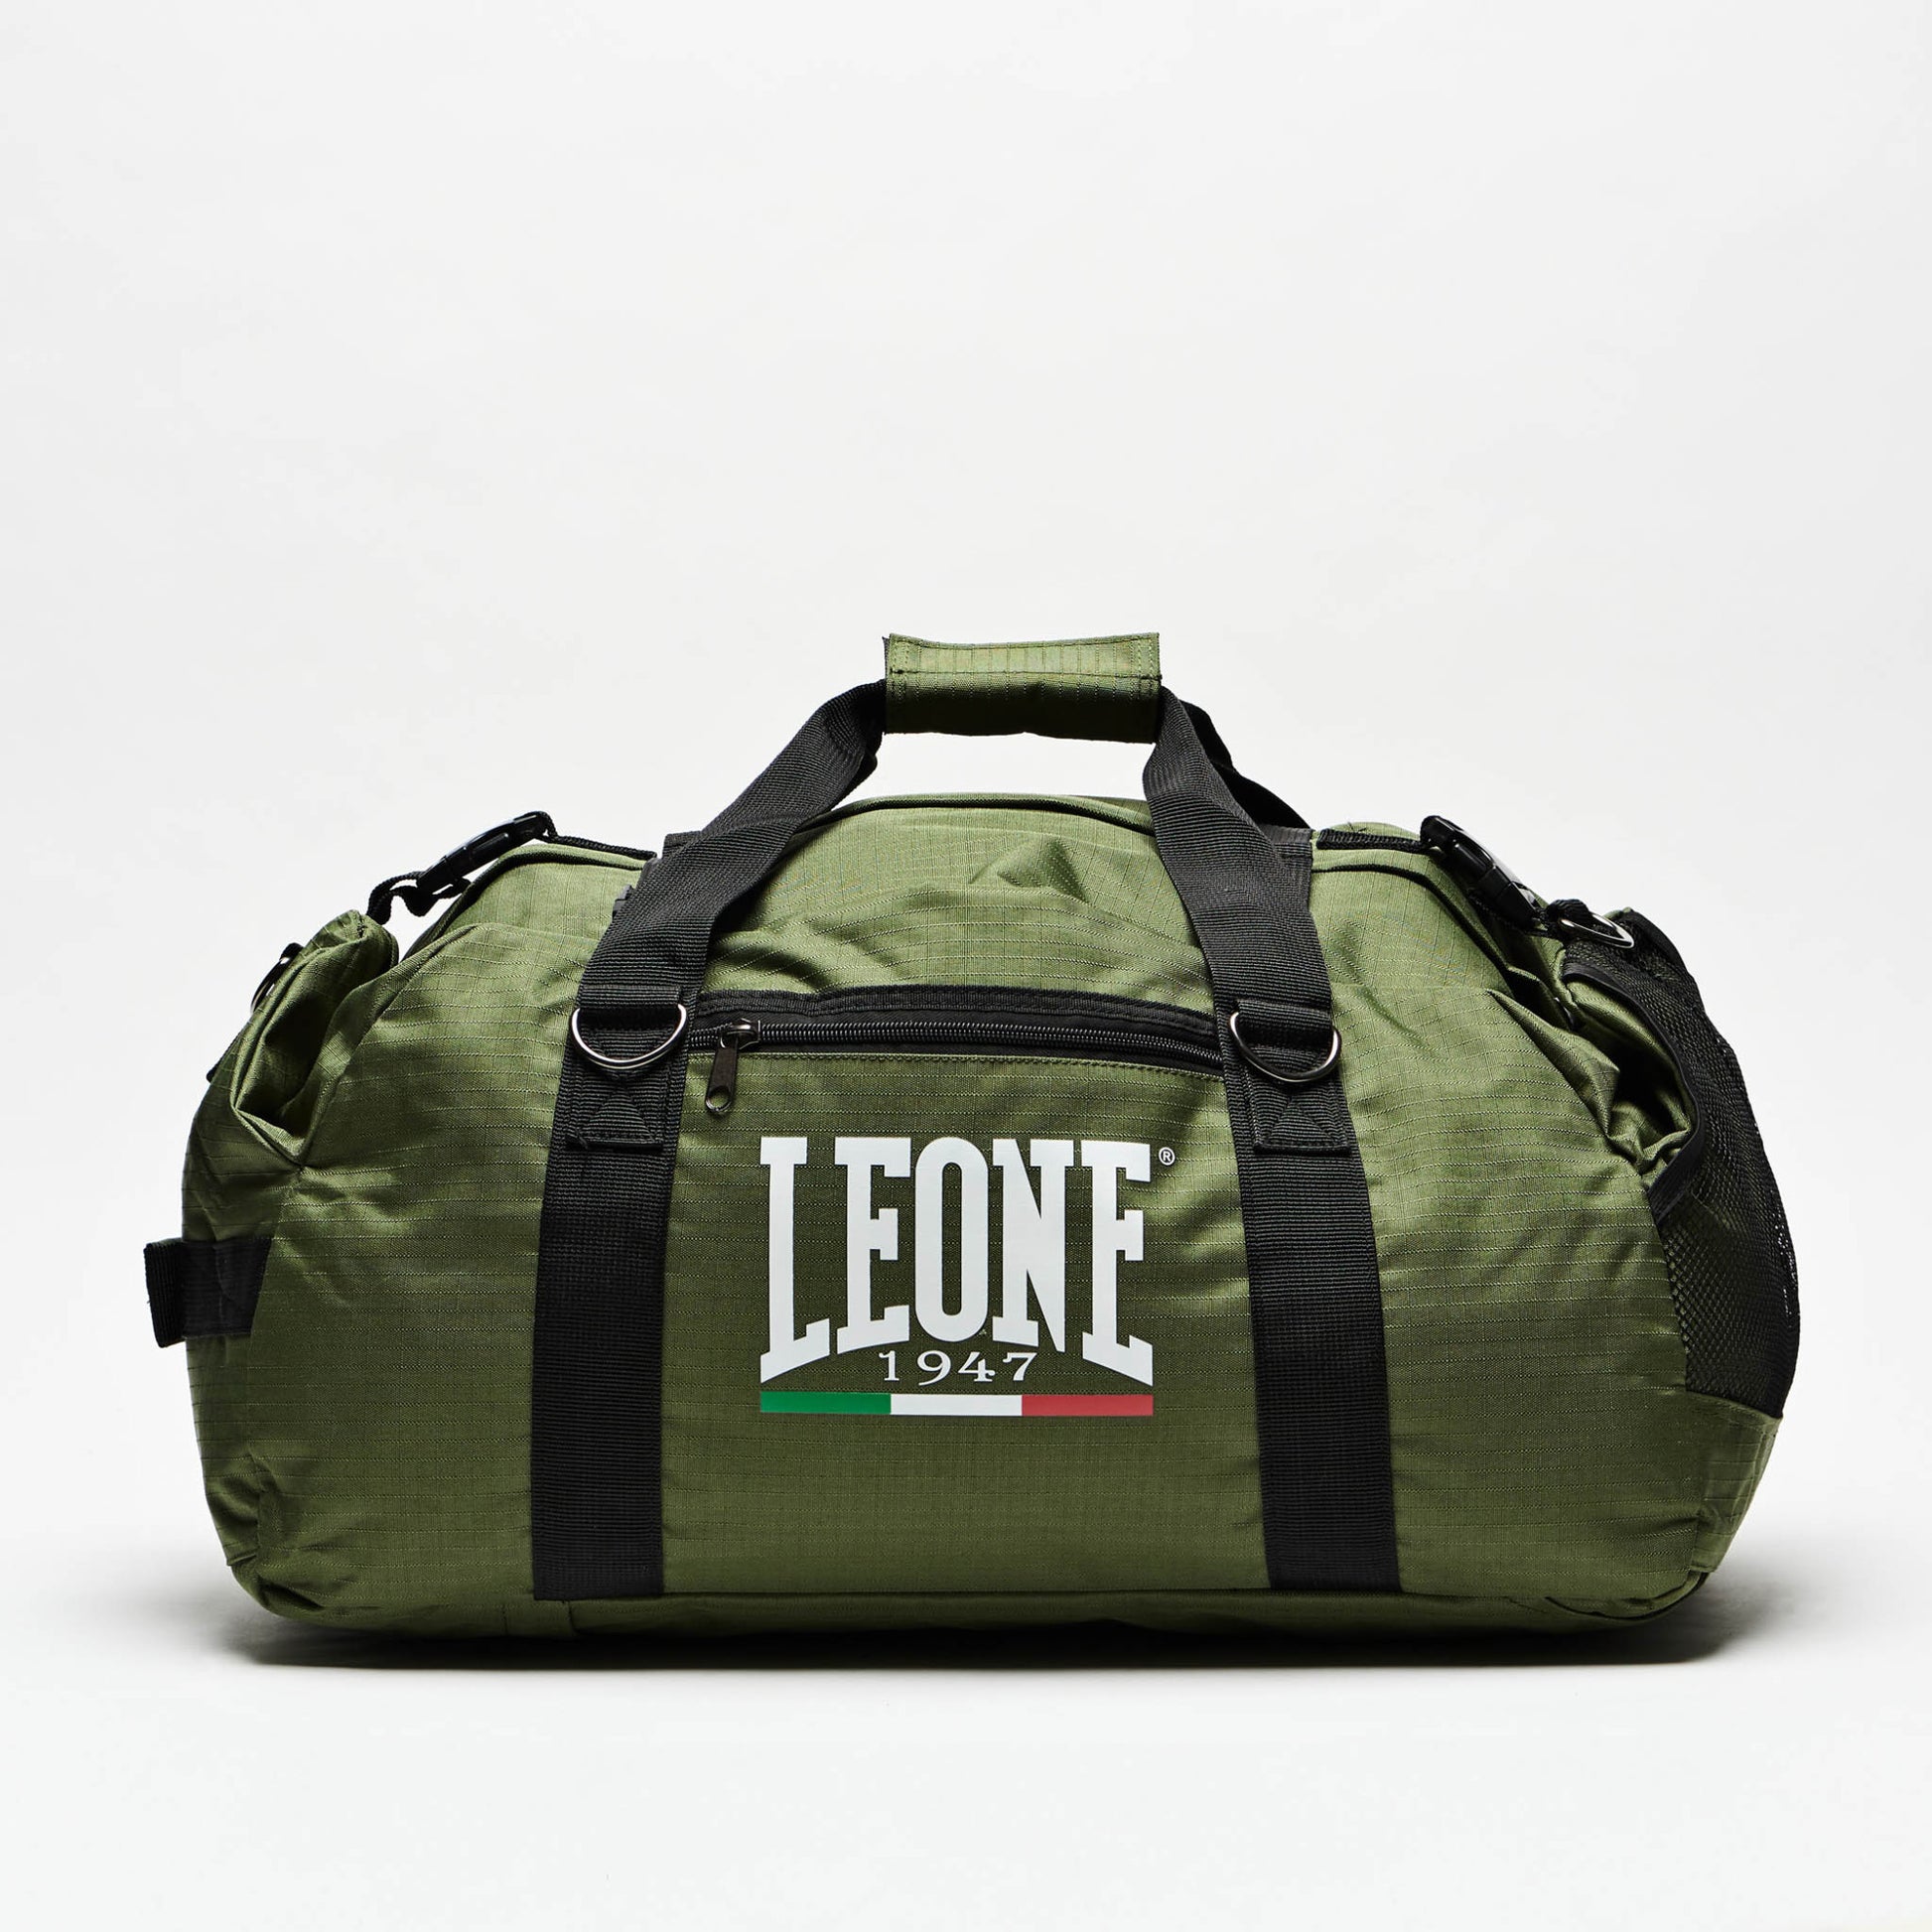 Leone Sport Backpack Bag with Retractable Straps Green Front ViewLeone Black Edition Backpack Bag - Boxing gym bag with sturdy shoulder straps Green